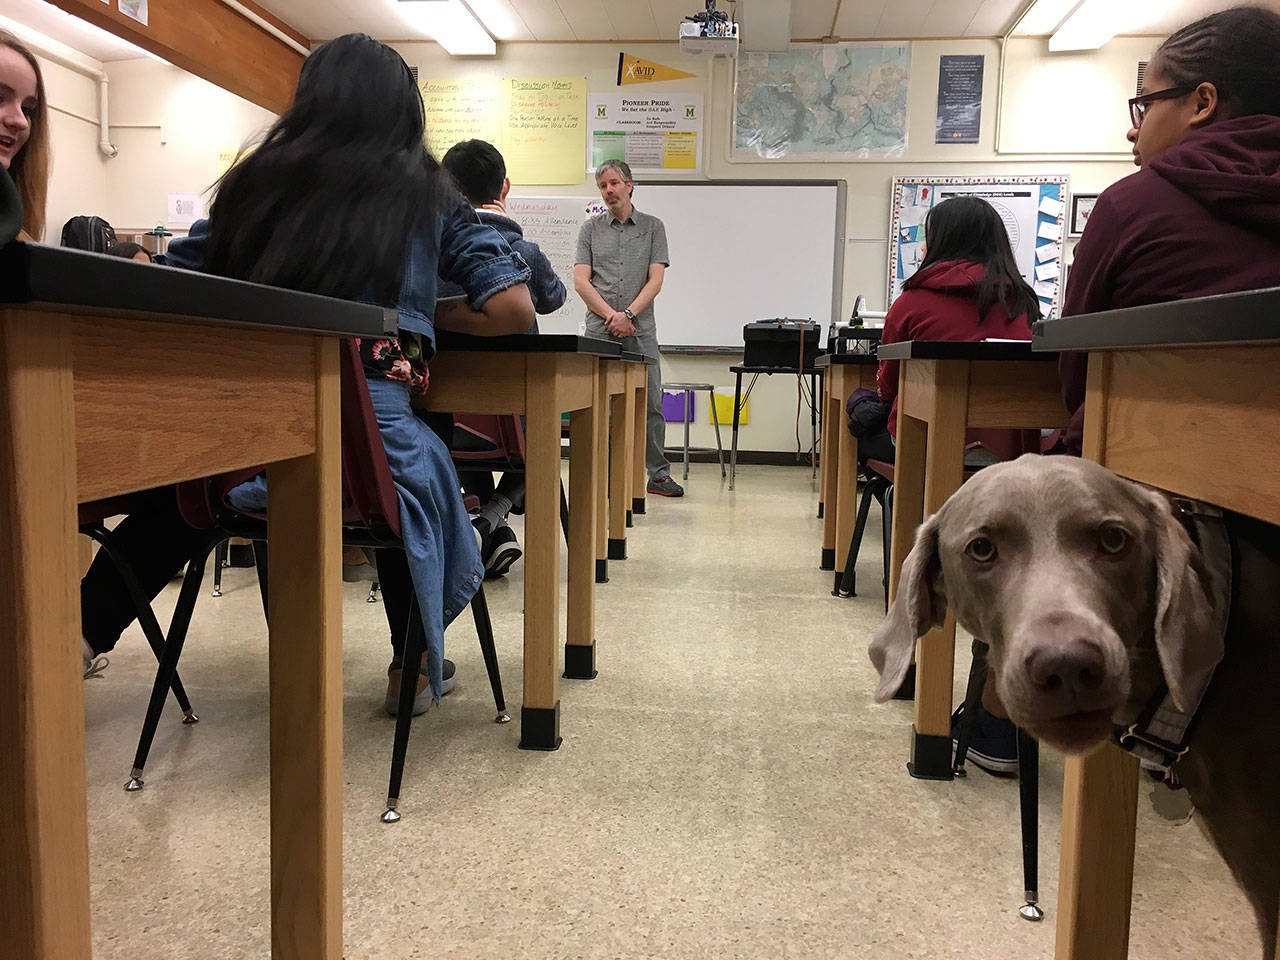 Dr. Rob McMonigle talks to students about his work as a Kent veterinarian as his dog, Wilson, tours the room during the Career Fair at Meeker Middle School. COURTESY PHOTO